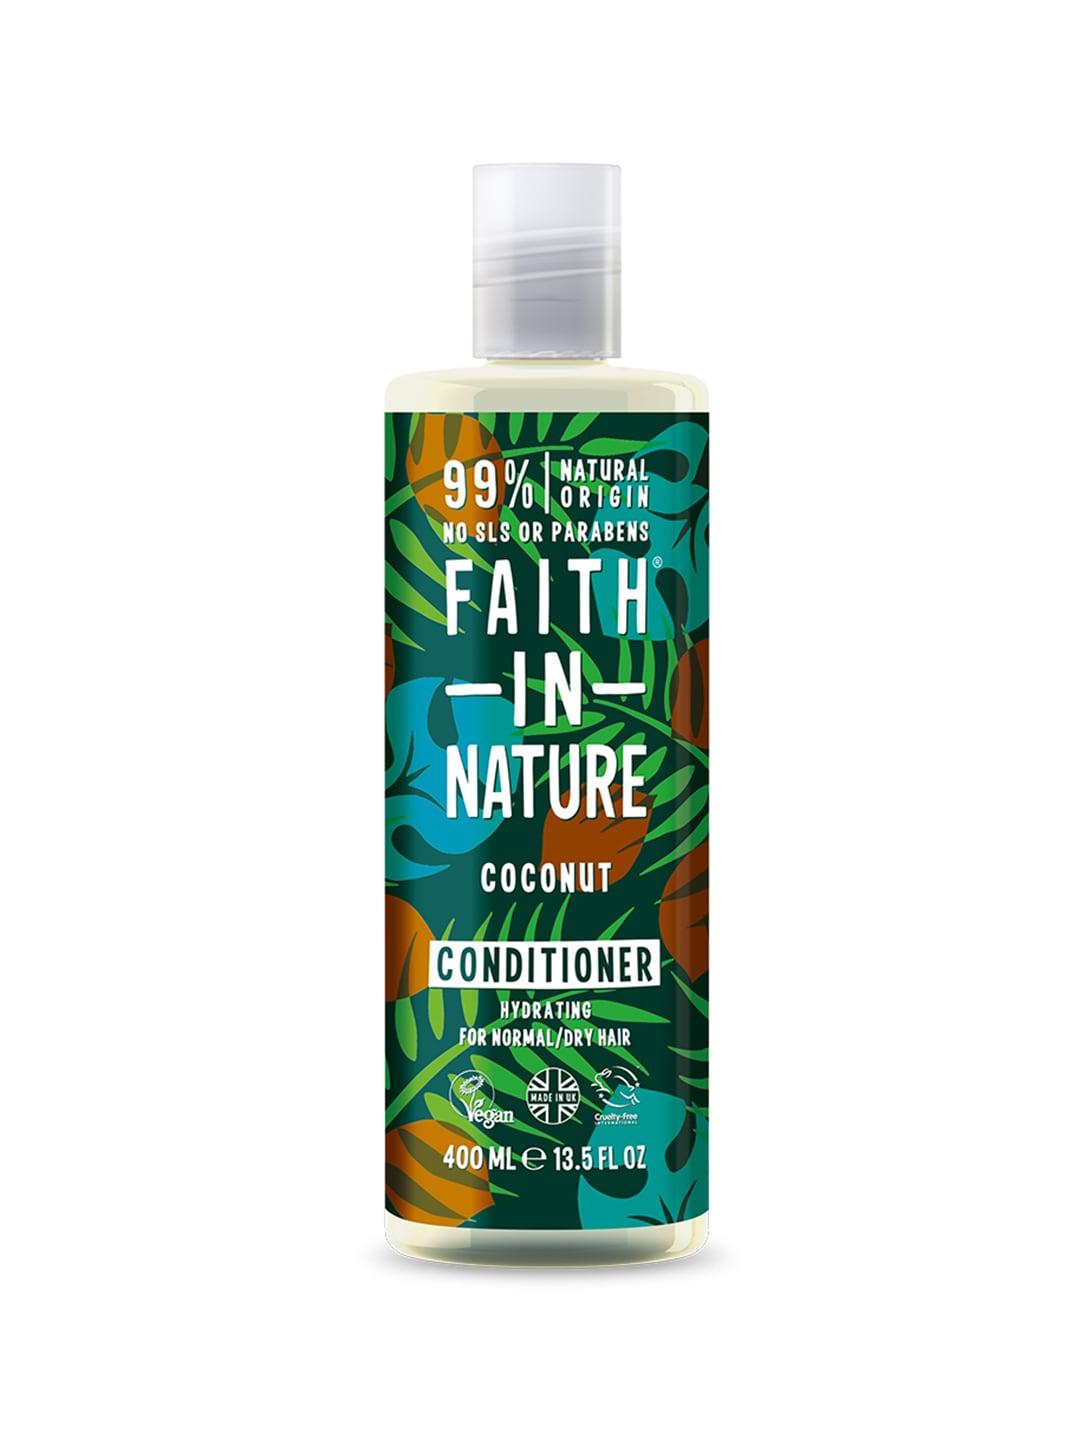 faith-in-nature-coconut-conditioner---hydrating-for-normal-/-dry-hair---400ml